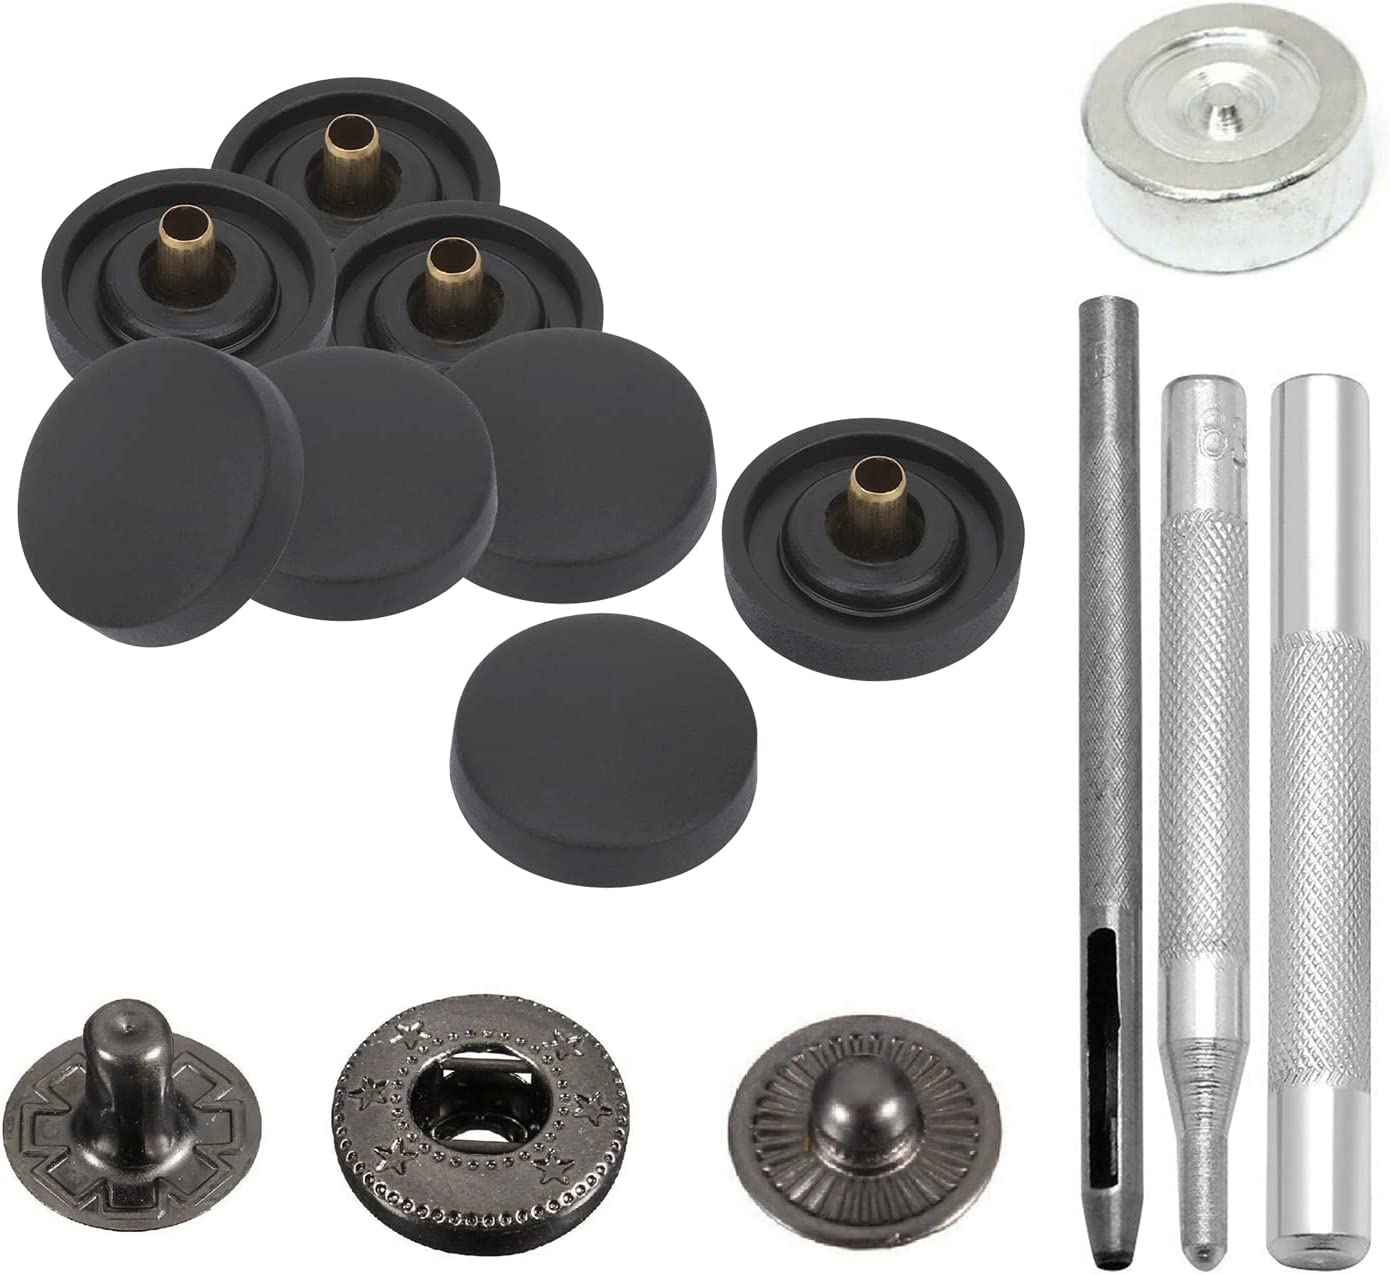 Trimming Shop 15mm S Spring Press Studs Snap Fasteners Plastic Cap with  Gunmetal Black Metal Back Snap Buttons - Black, 100pcs 